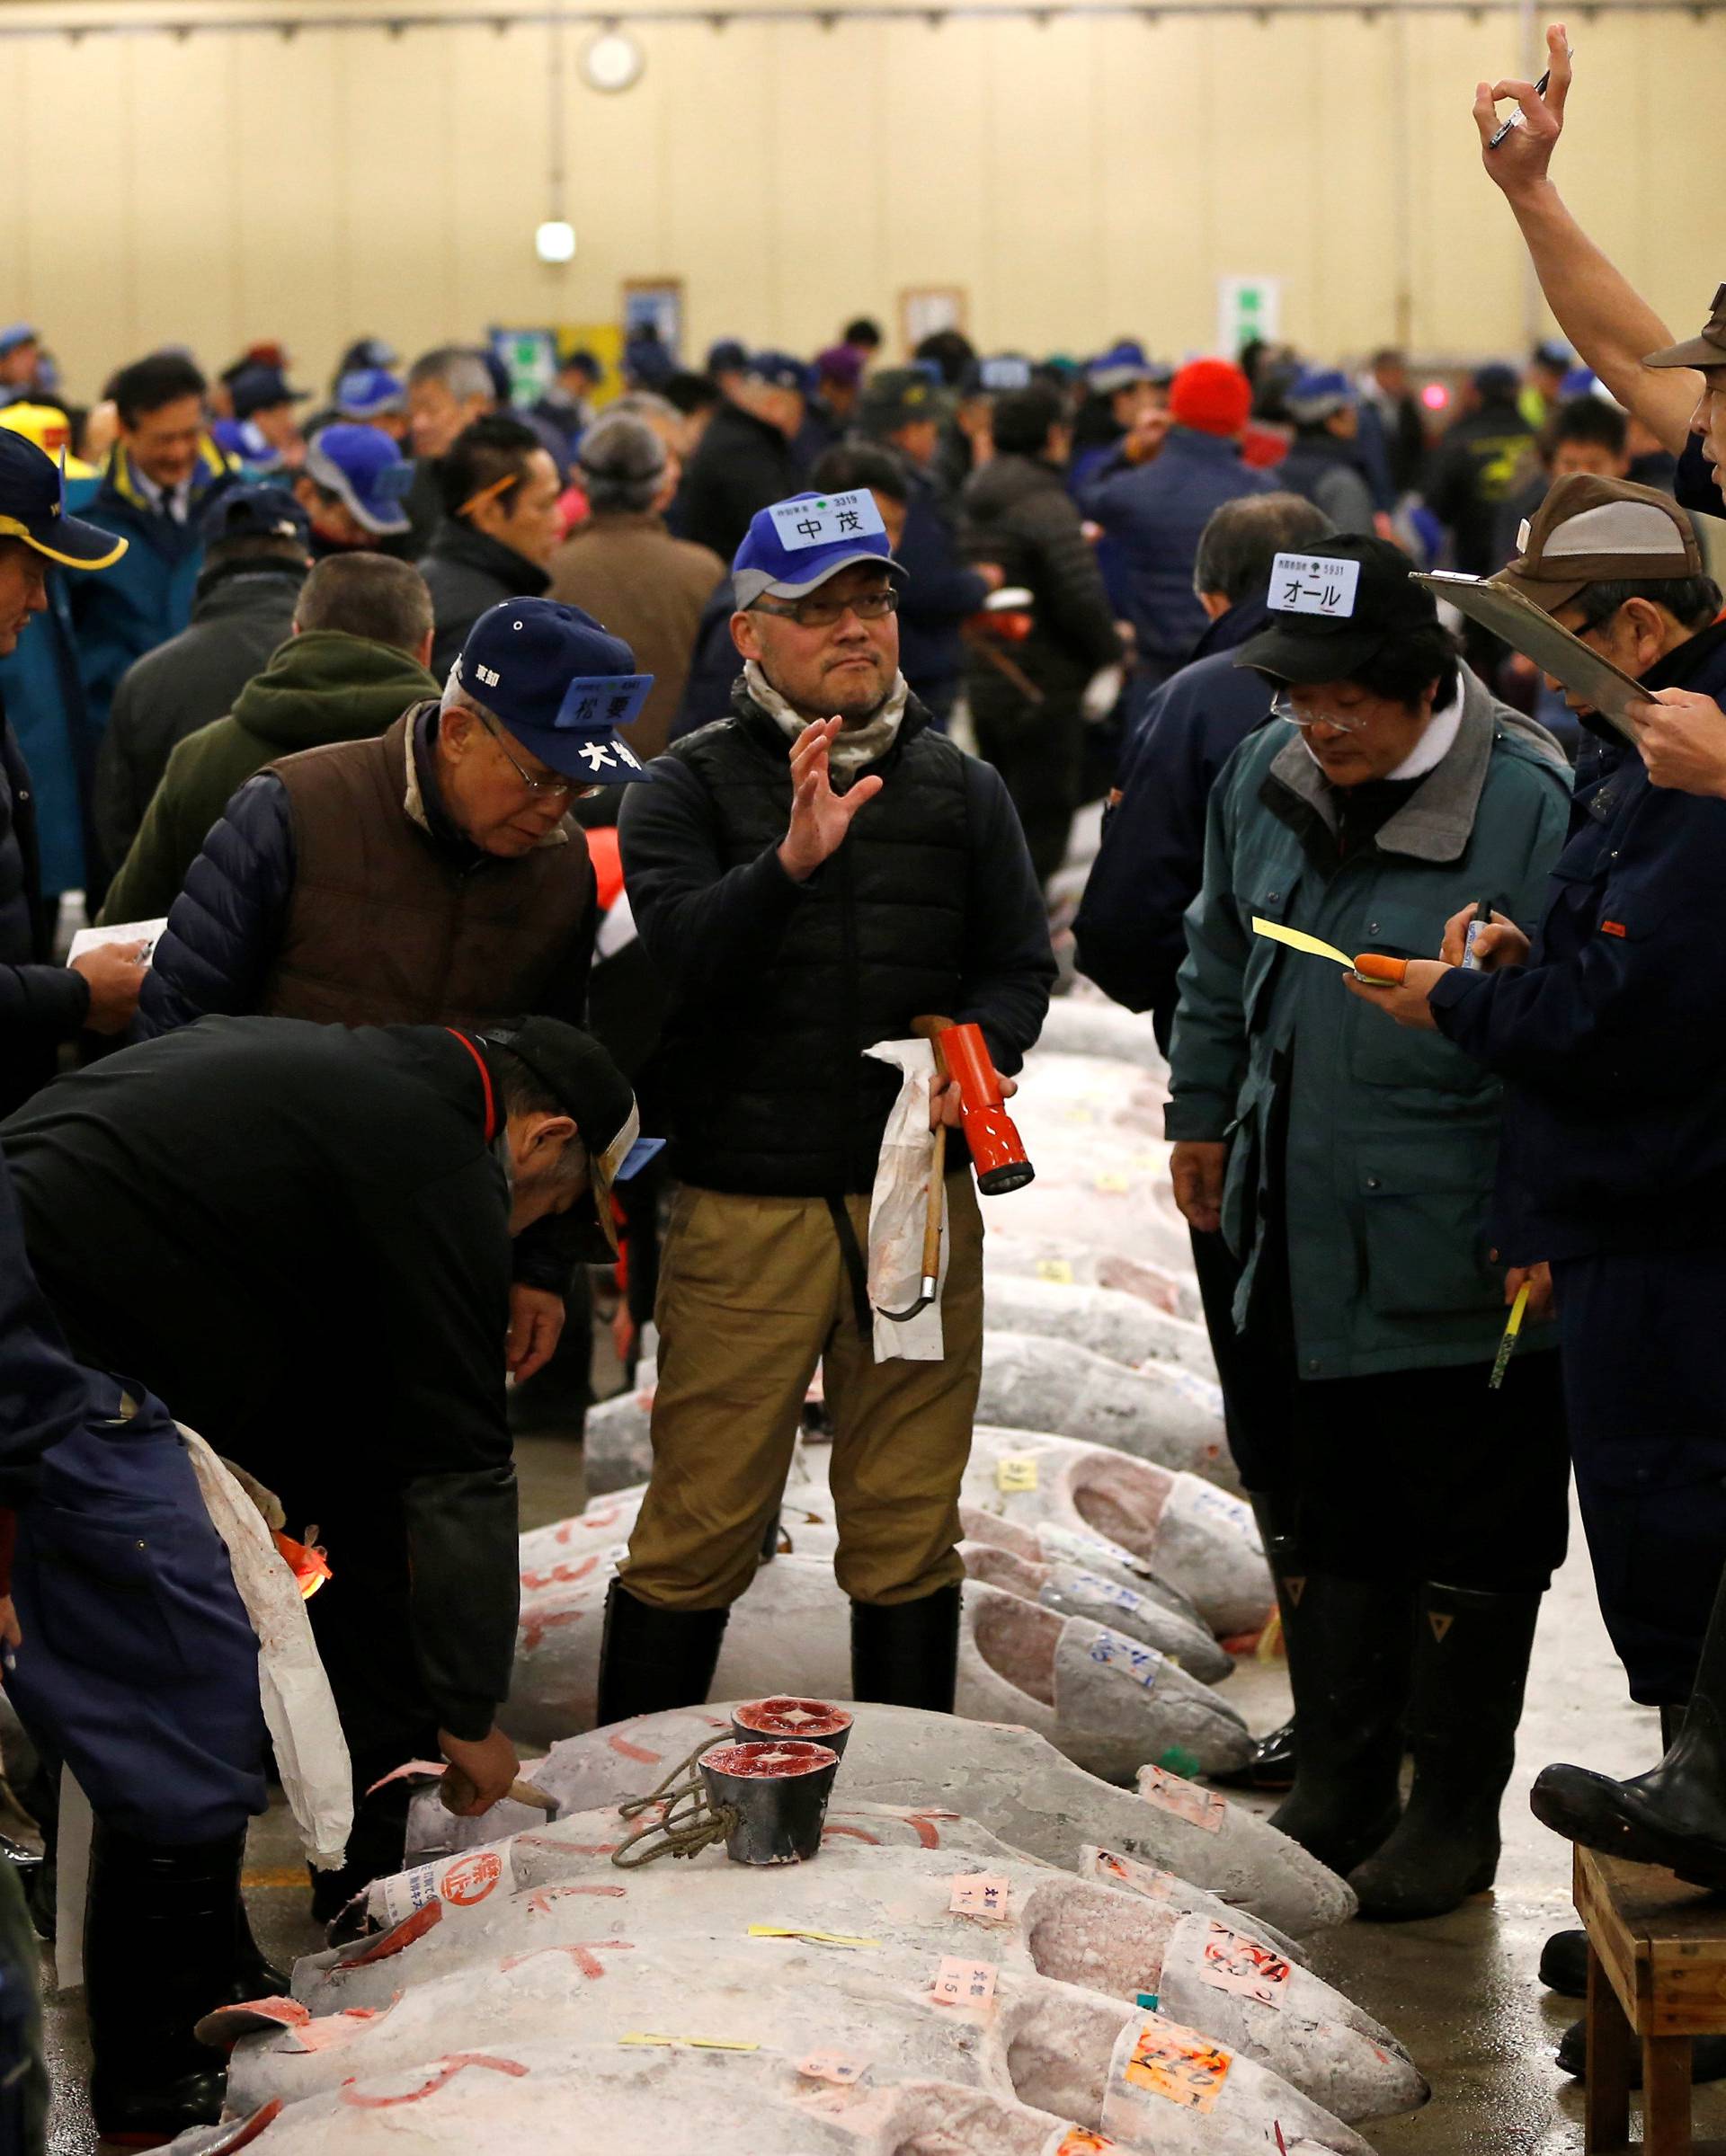 An auctioneer raises his hand as he starts the New Year's auction of the frozen tuna while wholesalers check the quality of frozen tuna displayed at the Tsukiji fish market in Tokyo, Japan